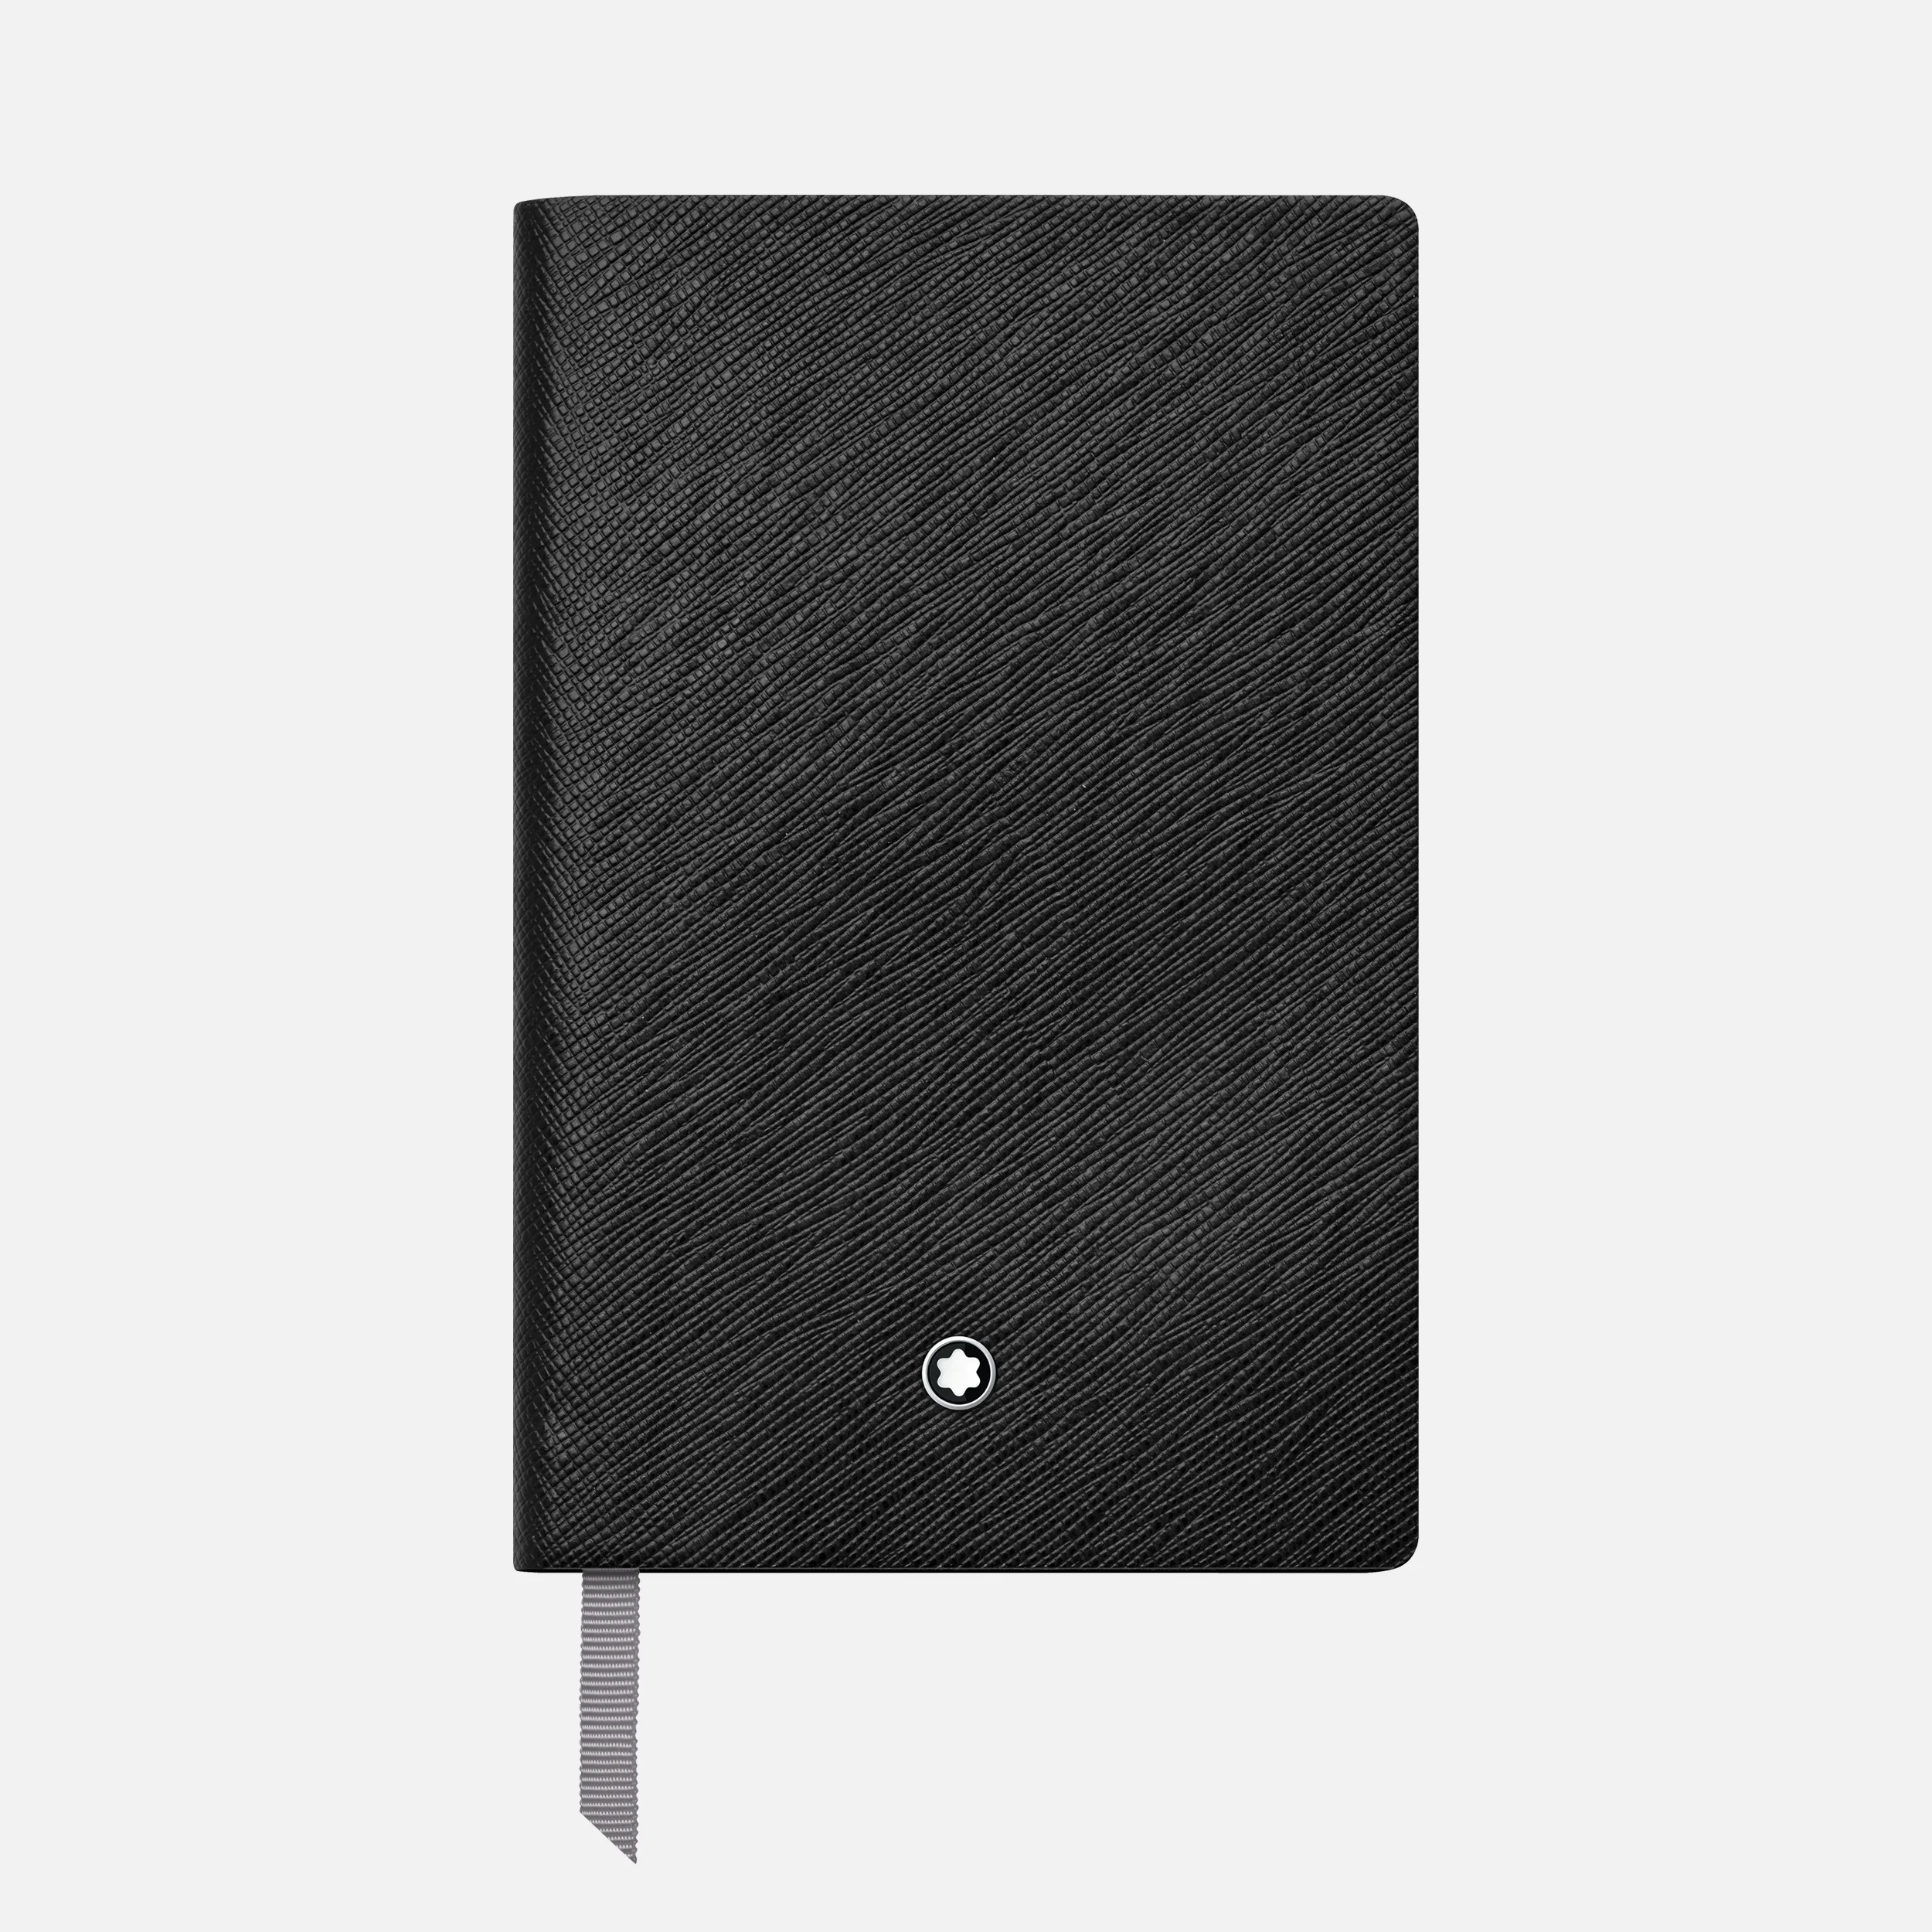 Montblanc Fine Stationery Notebook #148 Meisterstuck Black Lined - Pencraft the boutique